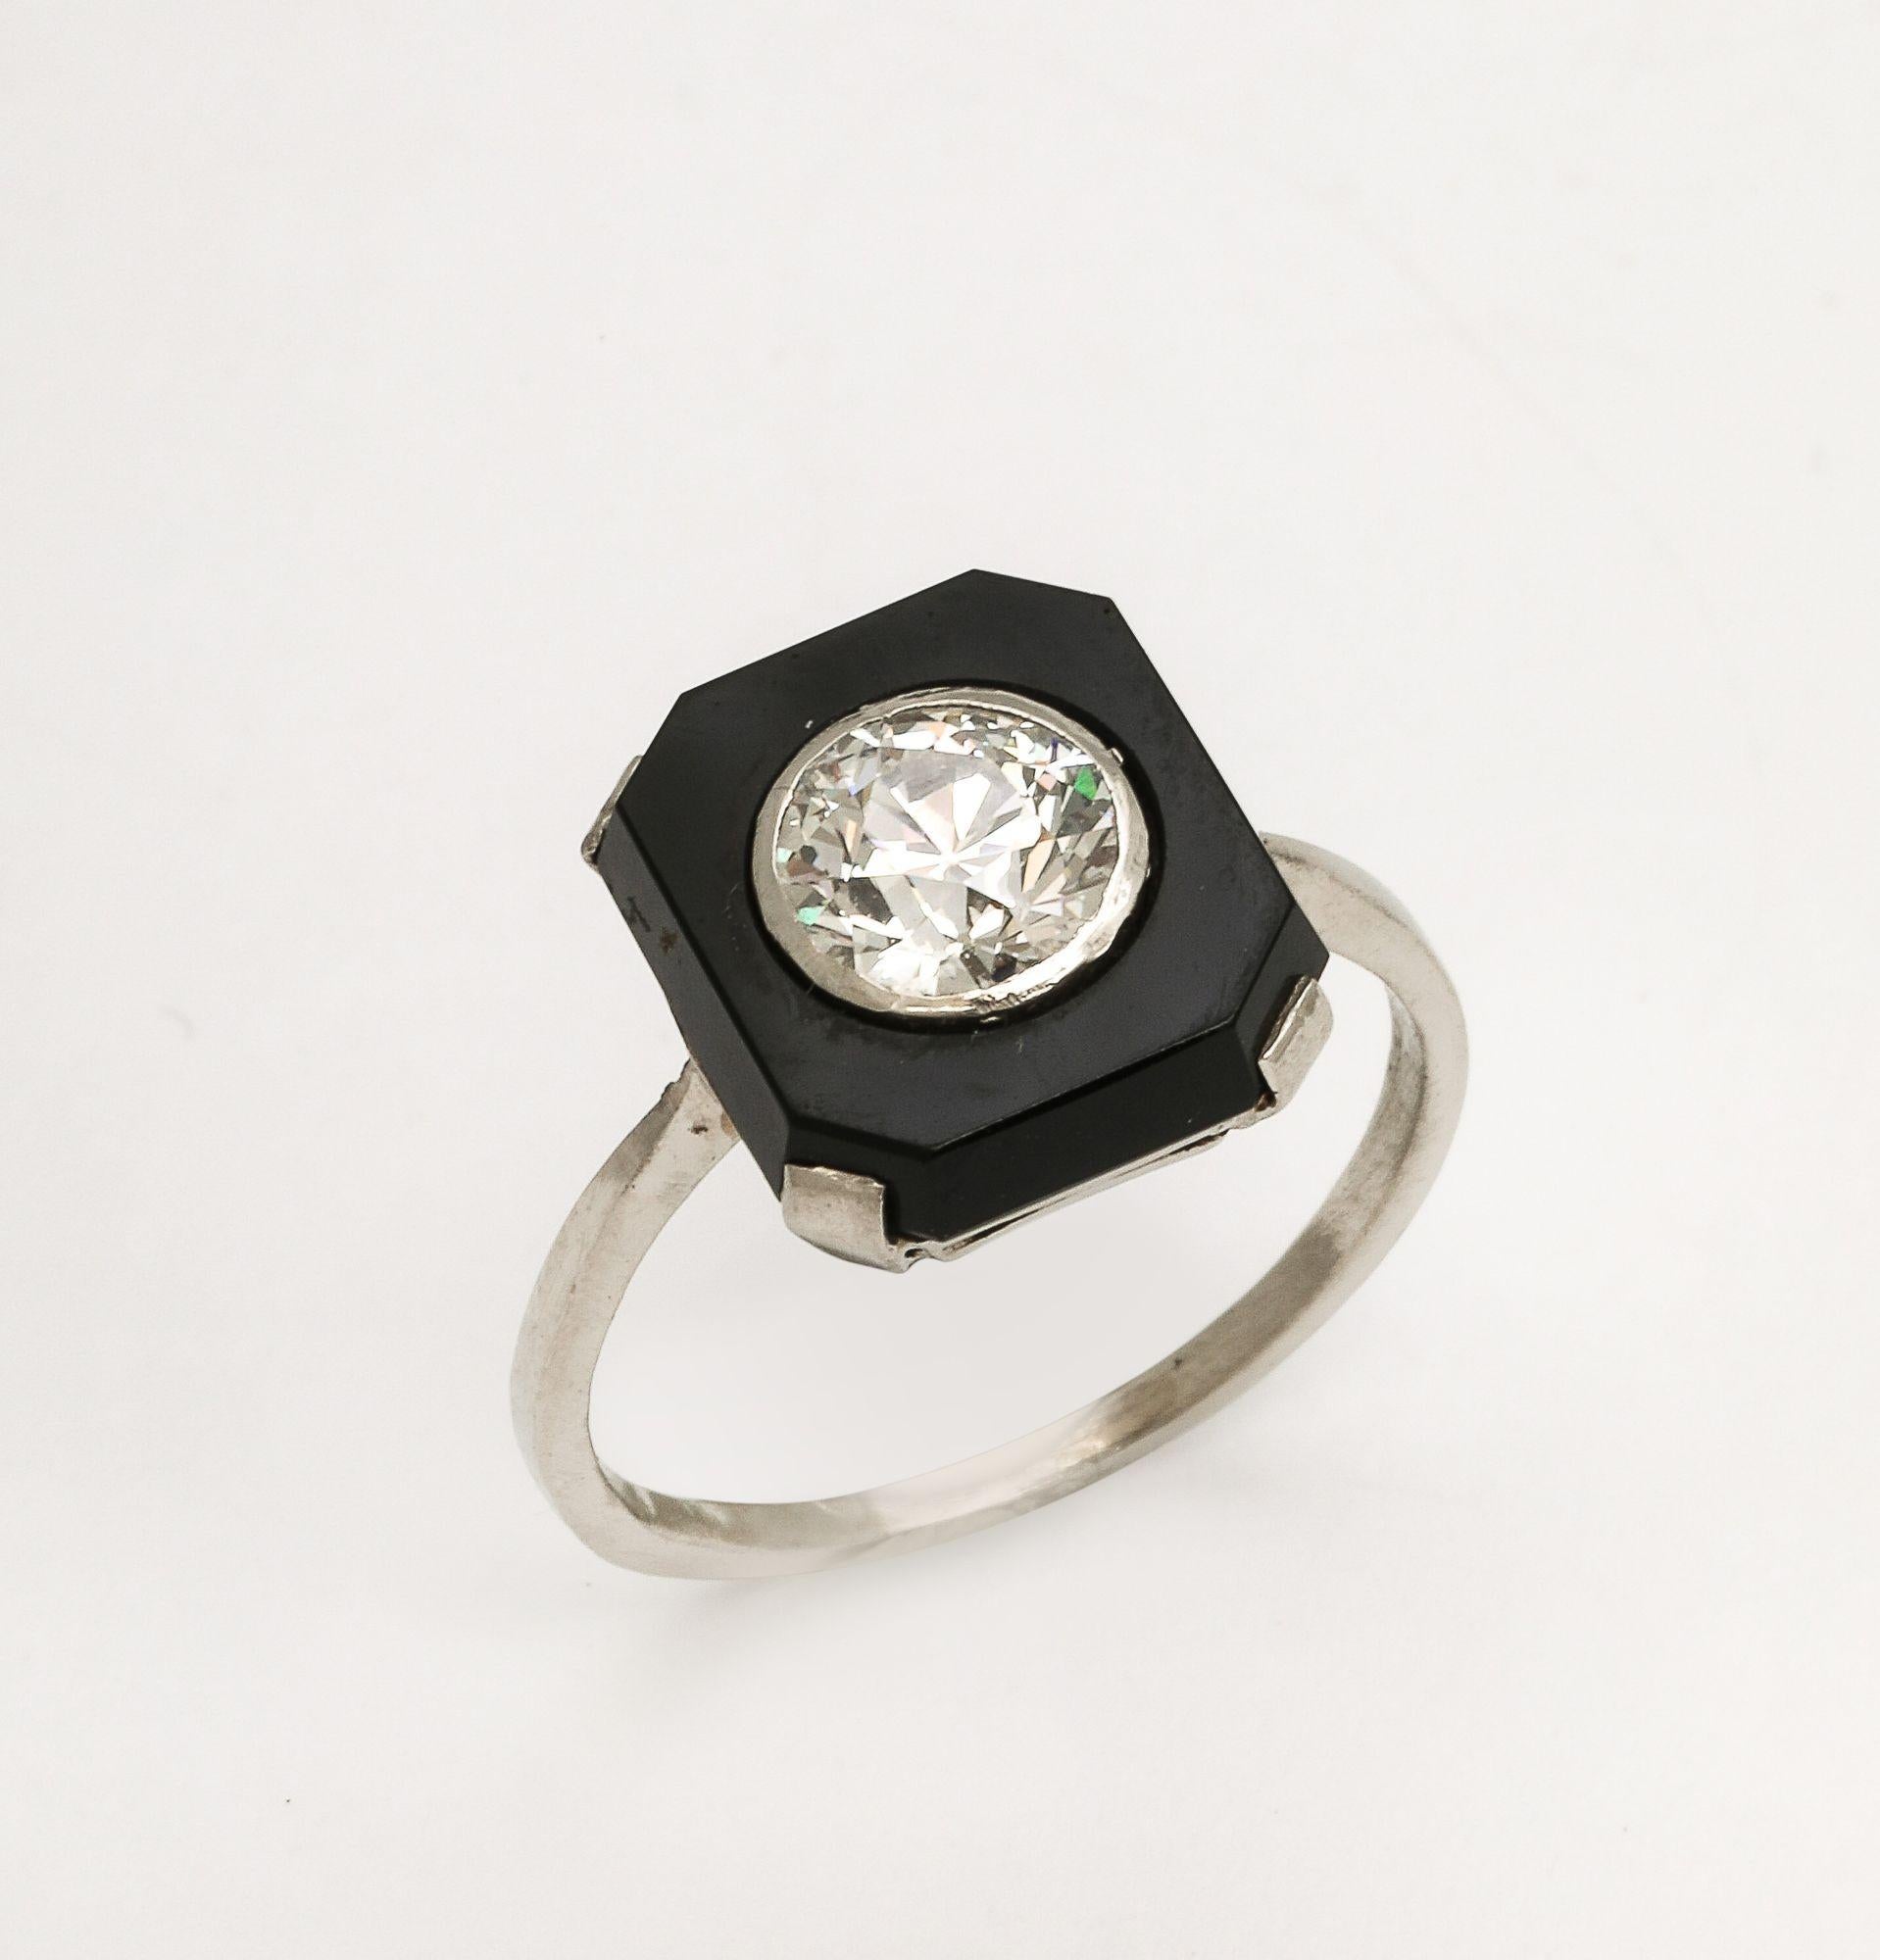 A wonderful Art Deco 1.10 ct Diamond and Onyx Platinum Engagement Ring. A fine 1.10 ct diamond is set in a rectangle of onyx and mounted on a platinum band. This engagement ring comes with an appraisal.